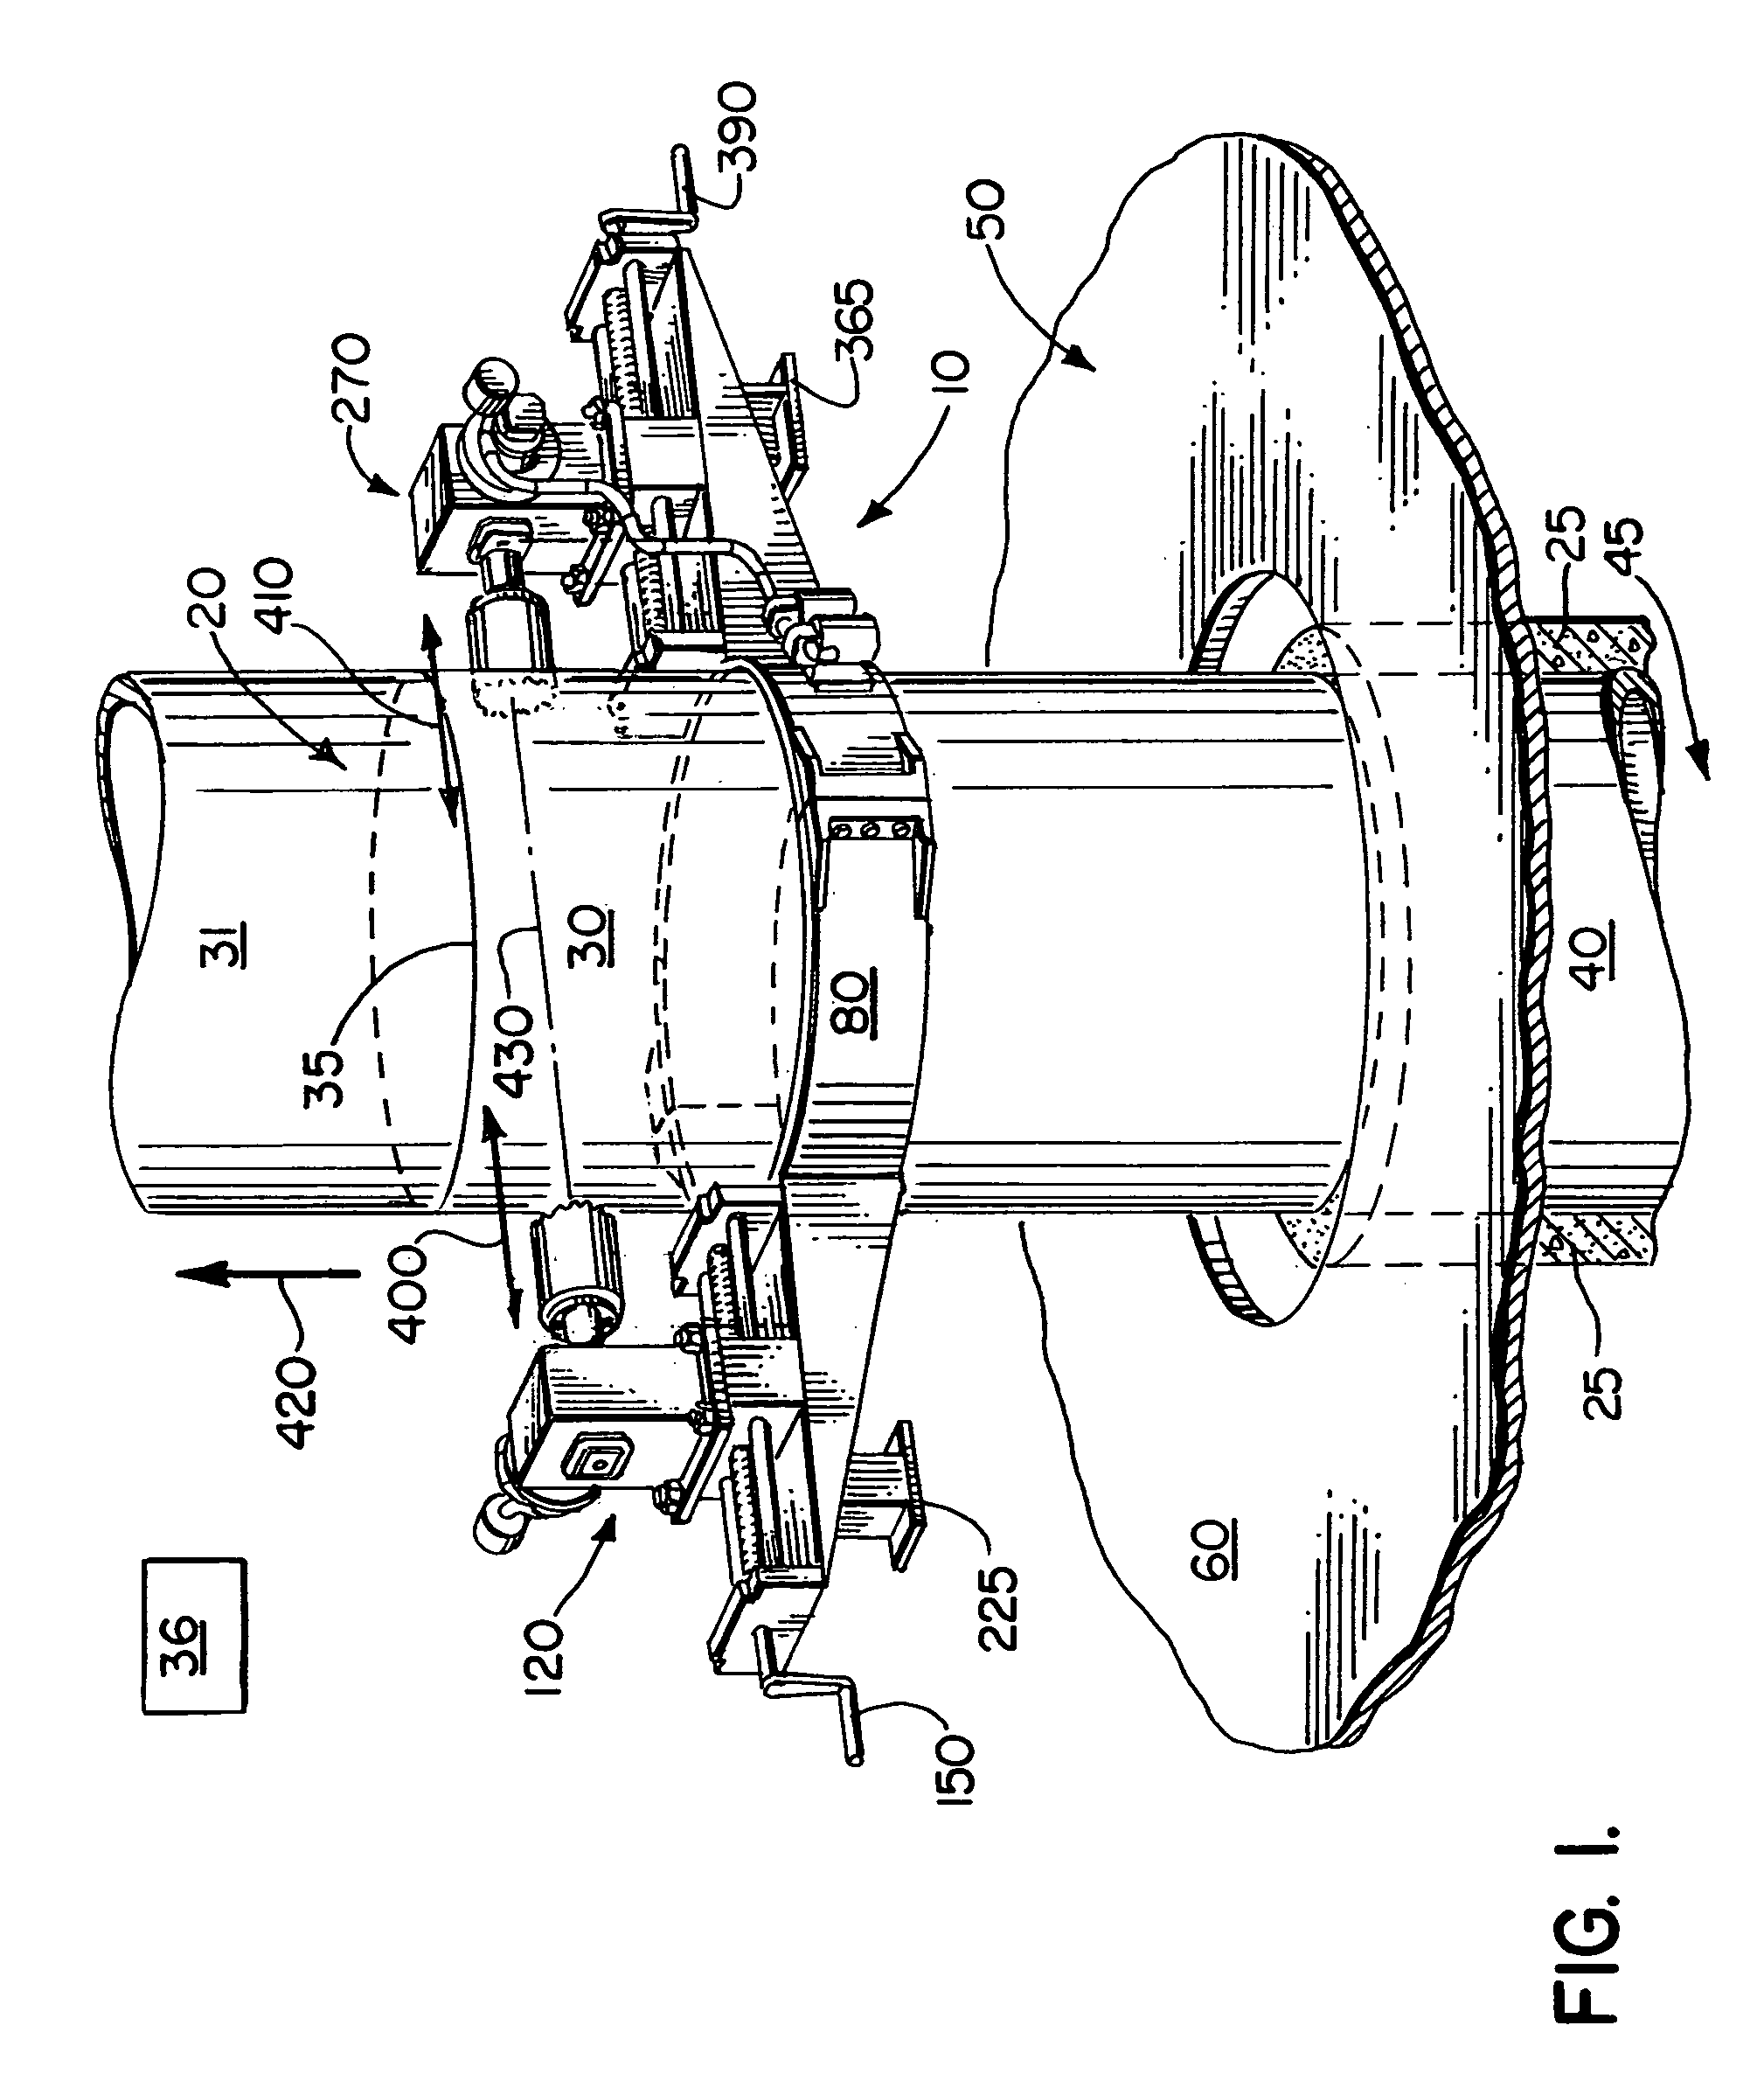 Method and apparatus for removing casing